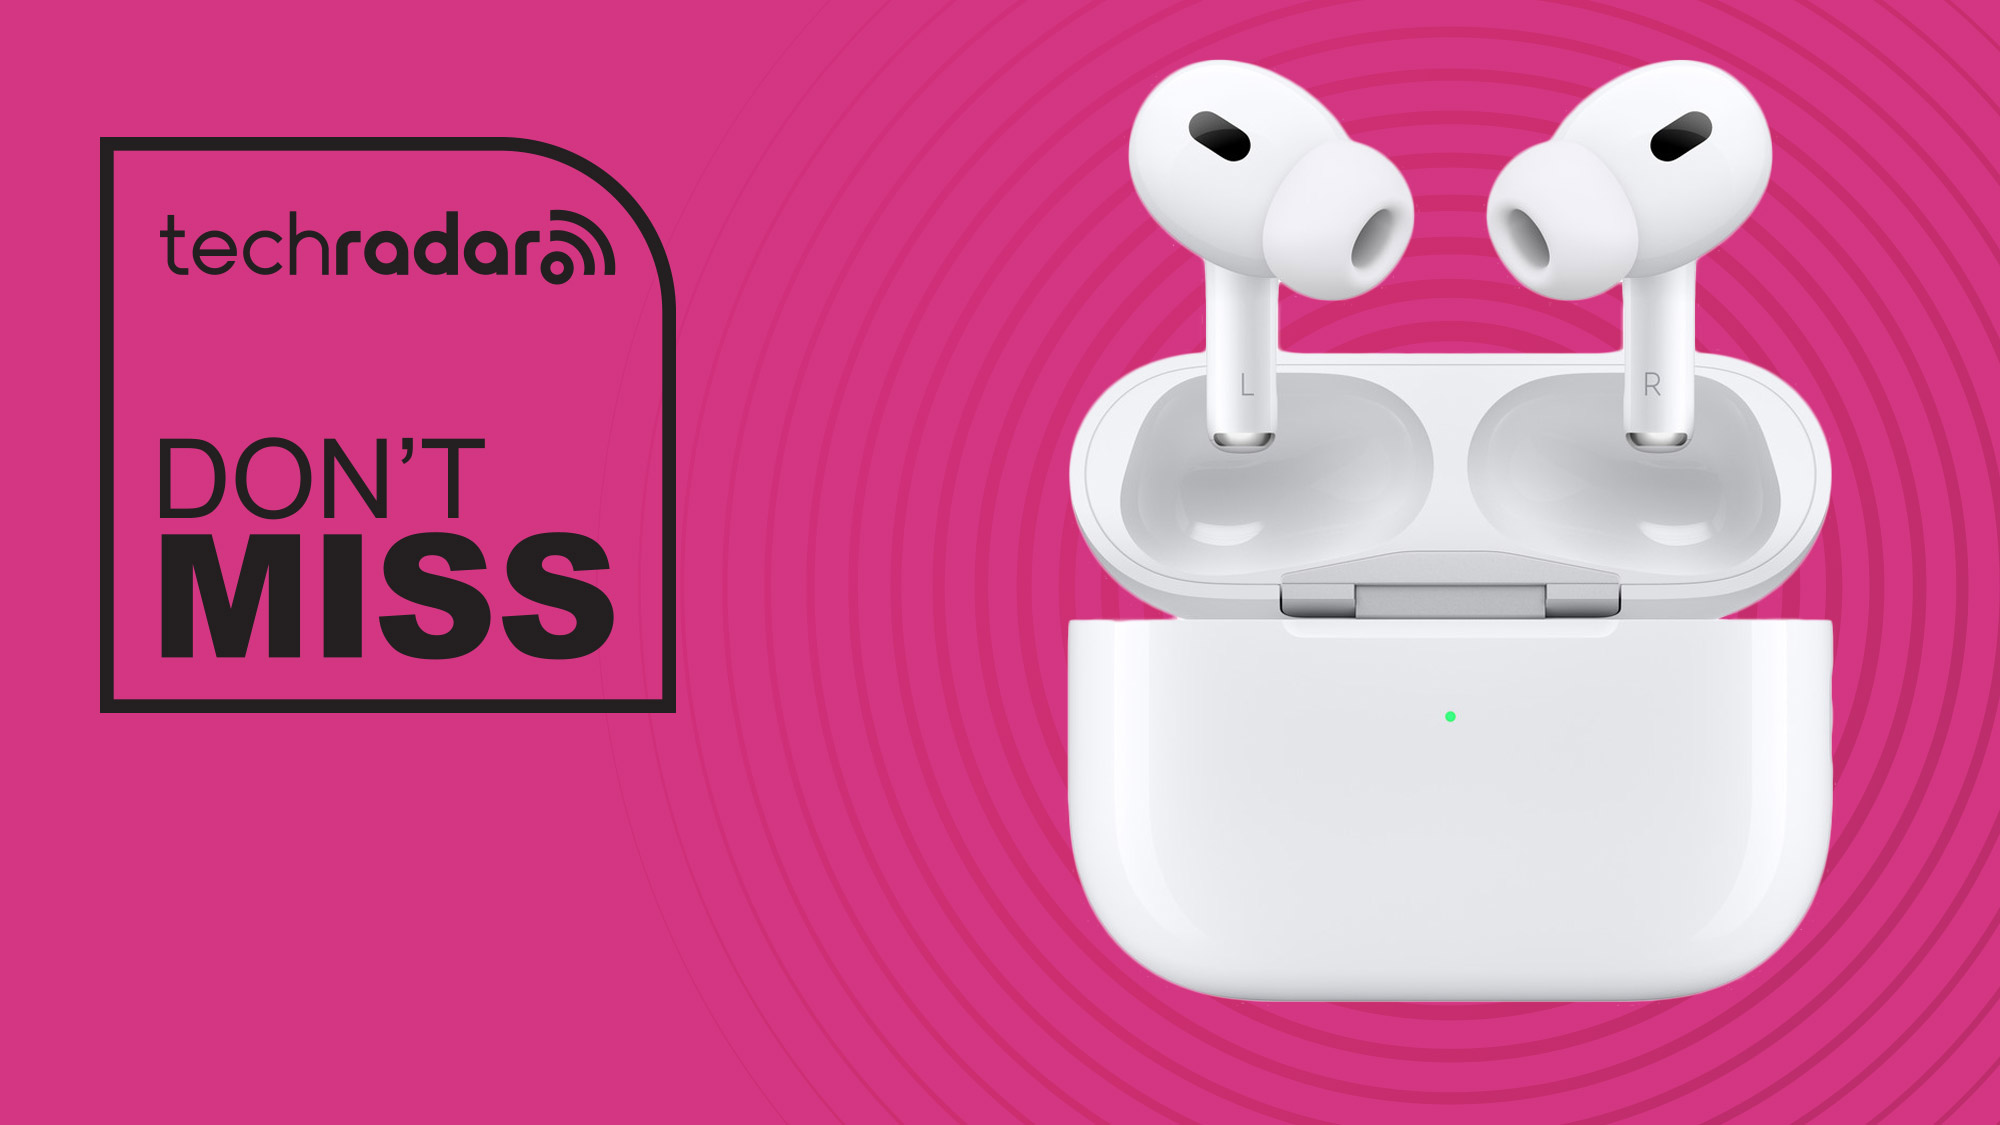 Apple AirPods Pro (2nd Generation) are 20% off on